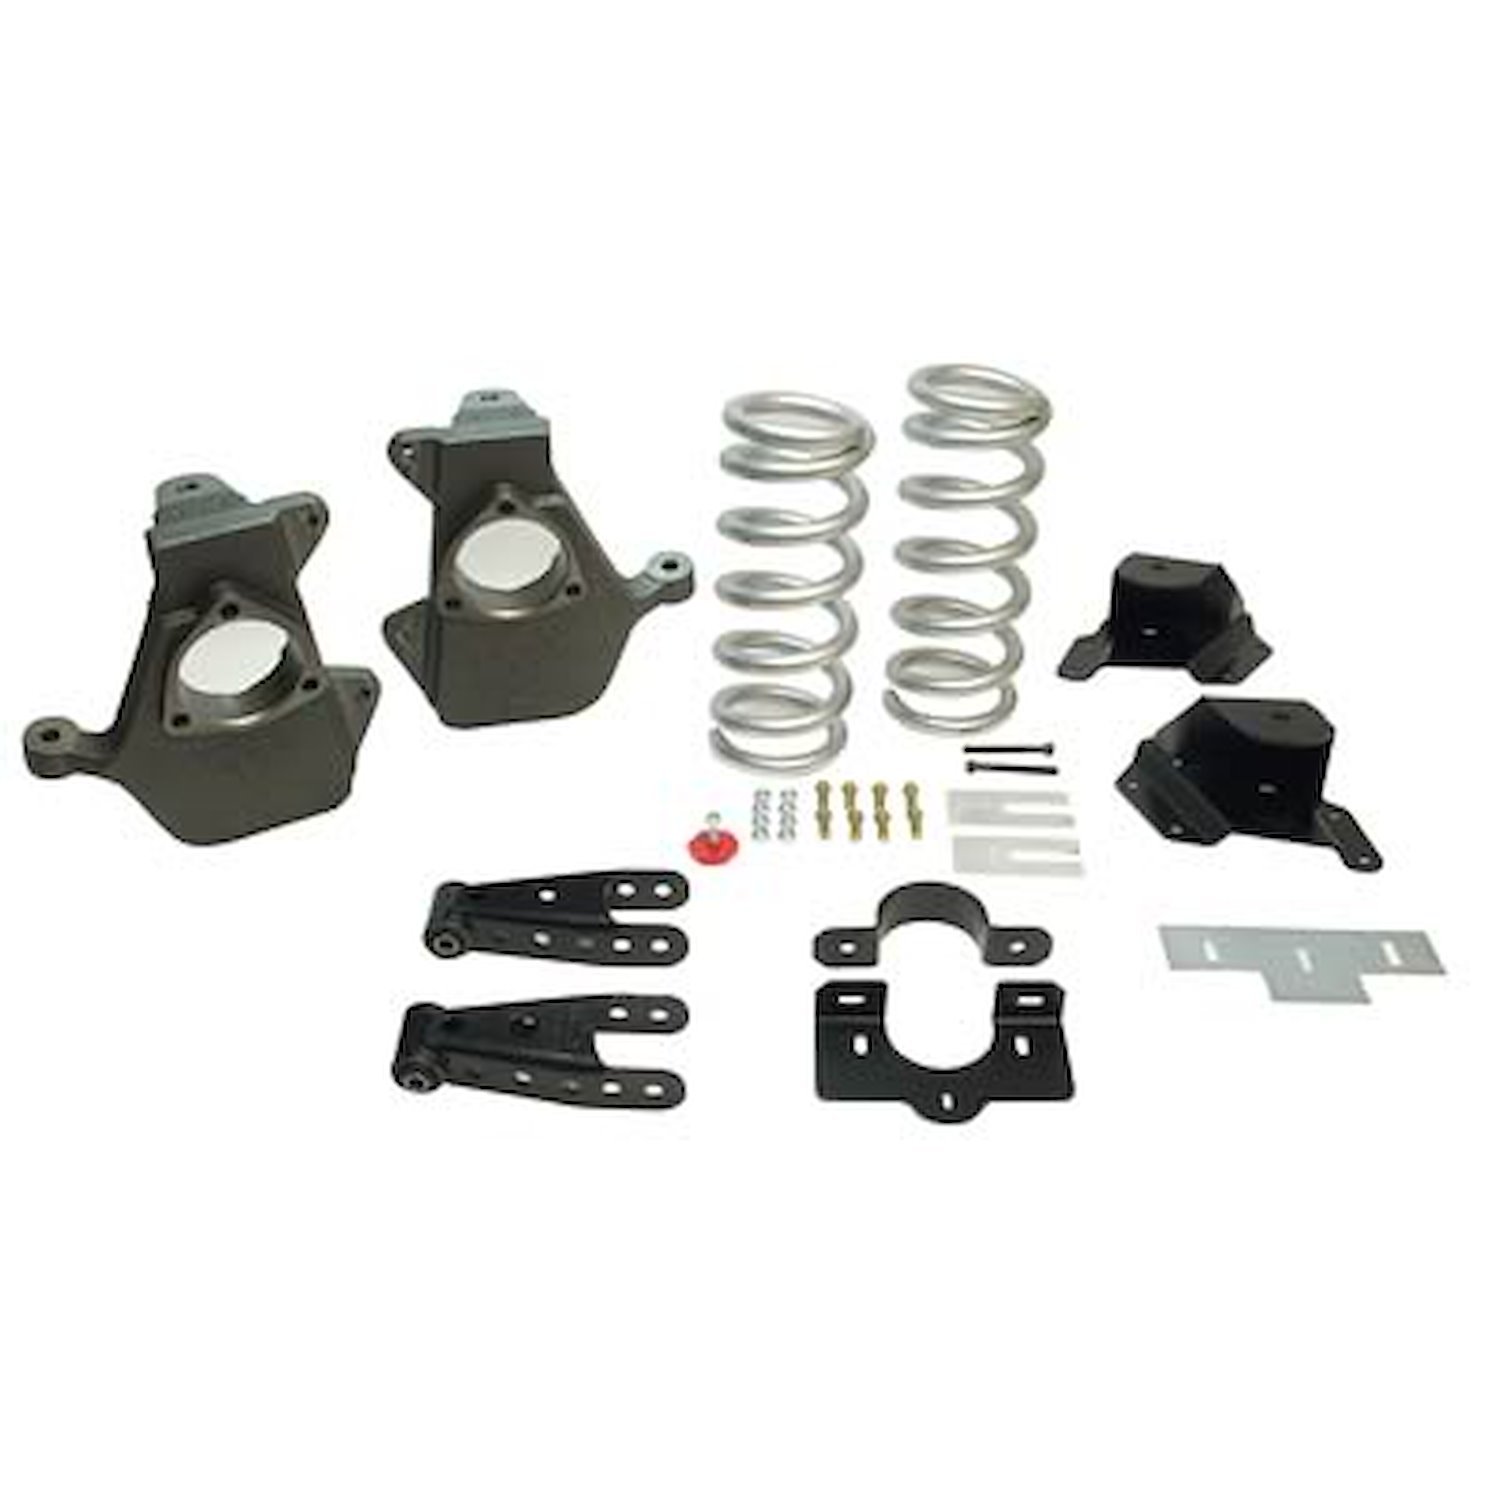 Complete Lowering Kit for 1997-2002 Ford Expedition/Lincoln